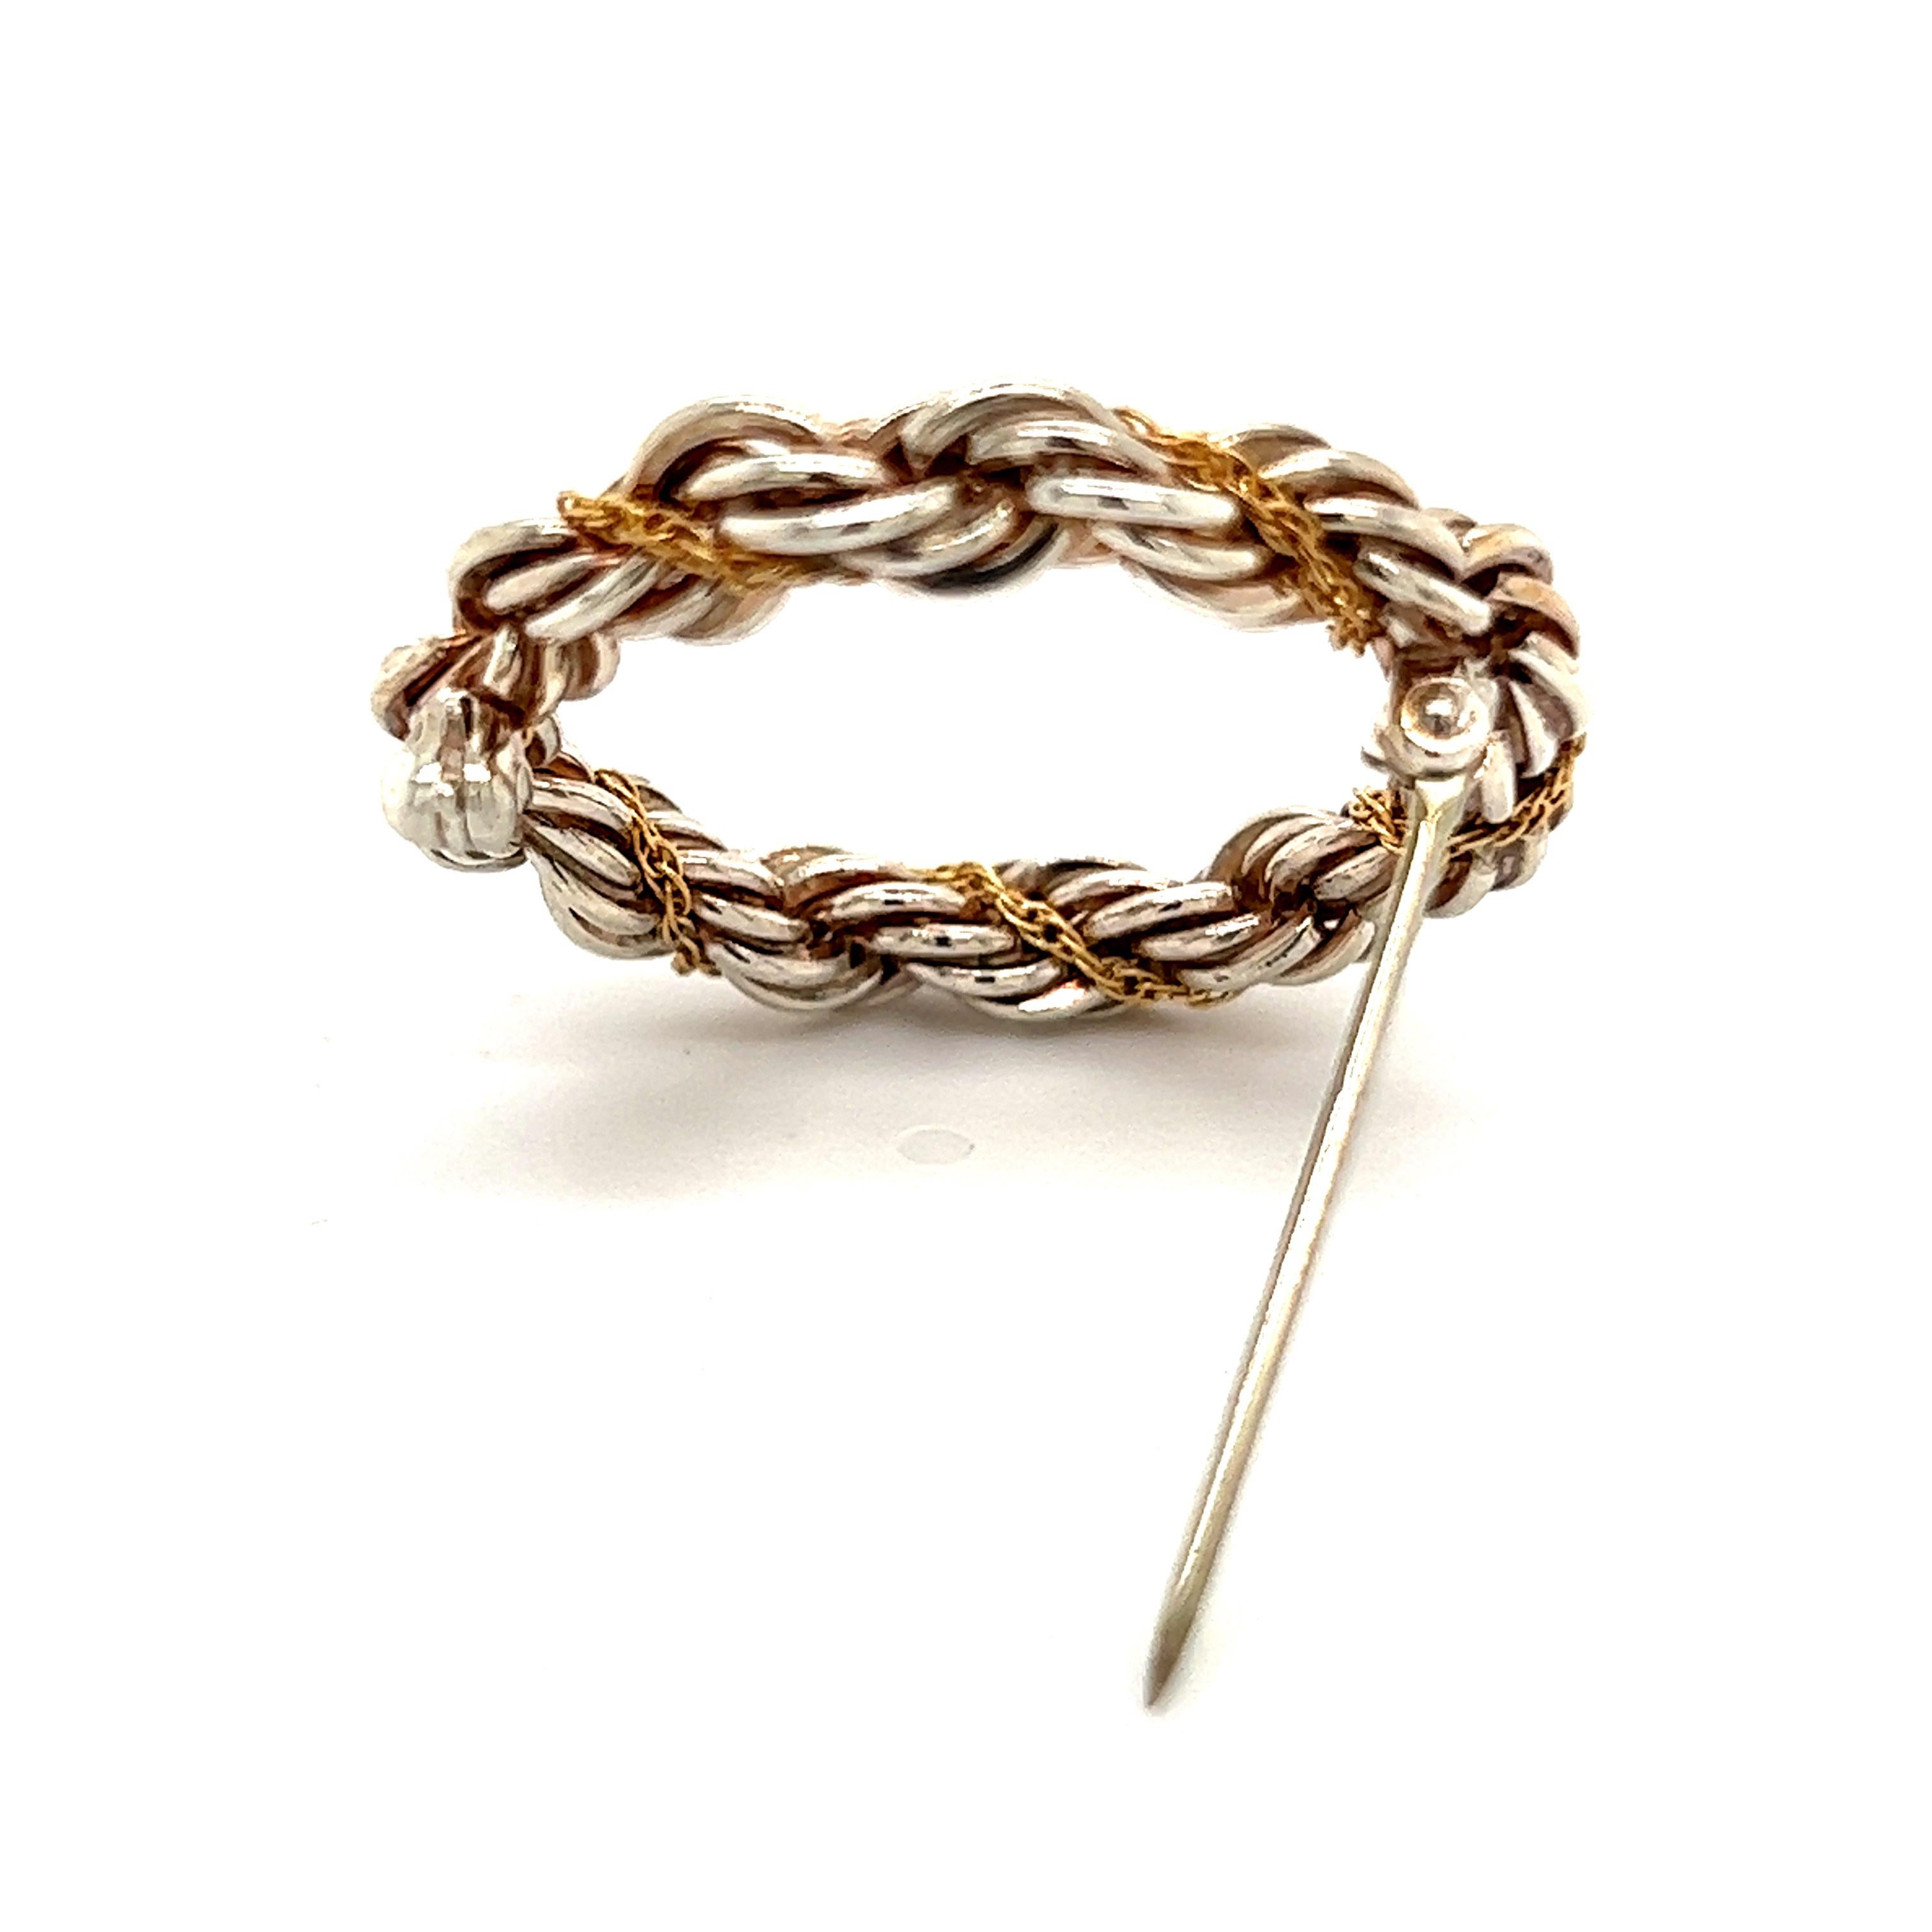 Tiffany & Co Estate Circle Rope Wreath Brooch Pin 18k Gold + Silver TIF279
 
TRUSTED SELLER SINCE 2002
 
PLEASE SEE OUR HUNDREDS OF POSITIVE FEEDBACKS FROM OUR CLIENTS!!
 
FREE SHIPPING!!

DETAILS
Size: 1-1/8 Inches
Weight: 7.03 Grams
Metal: